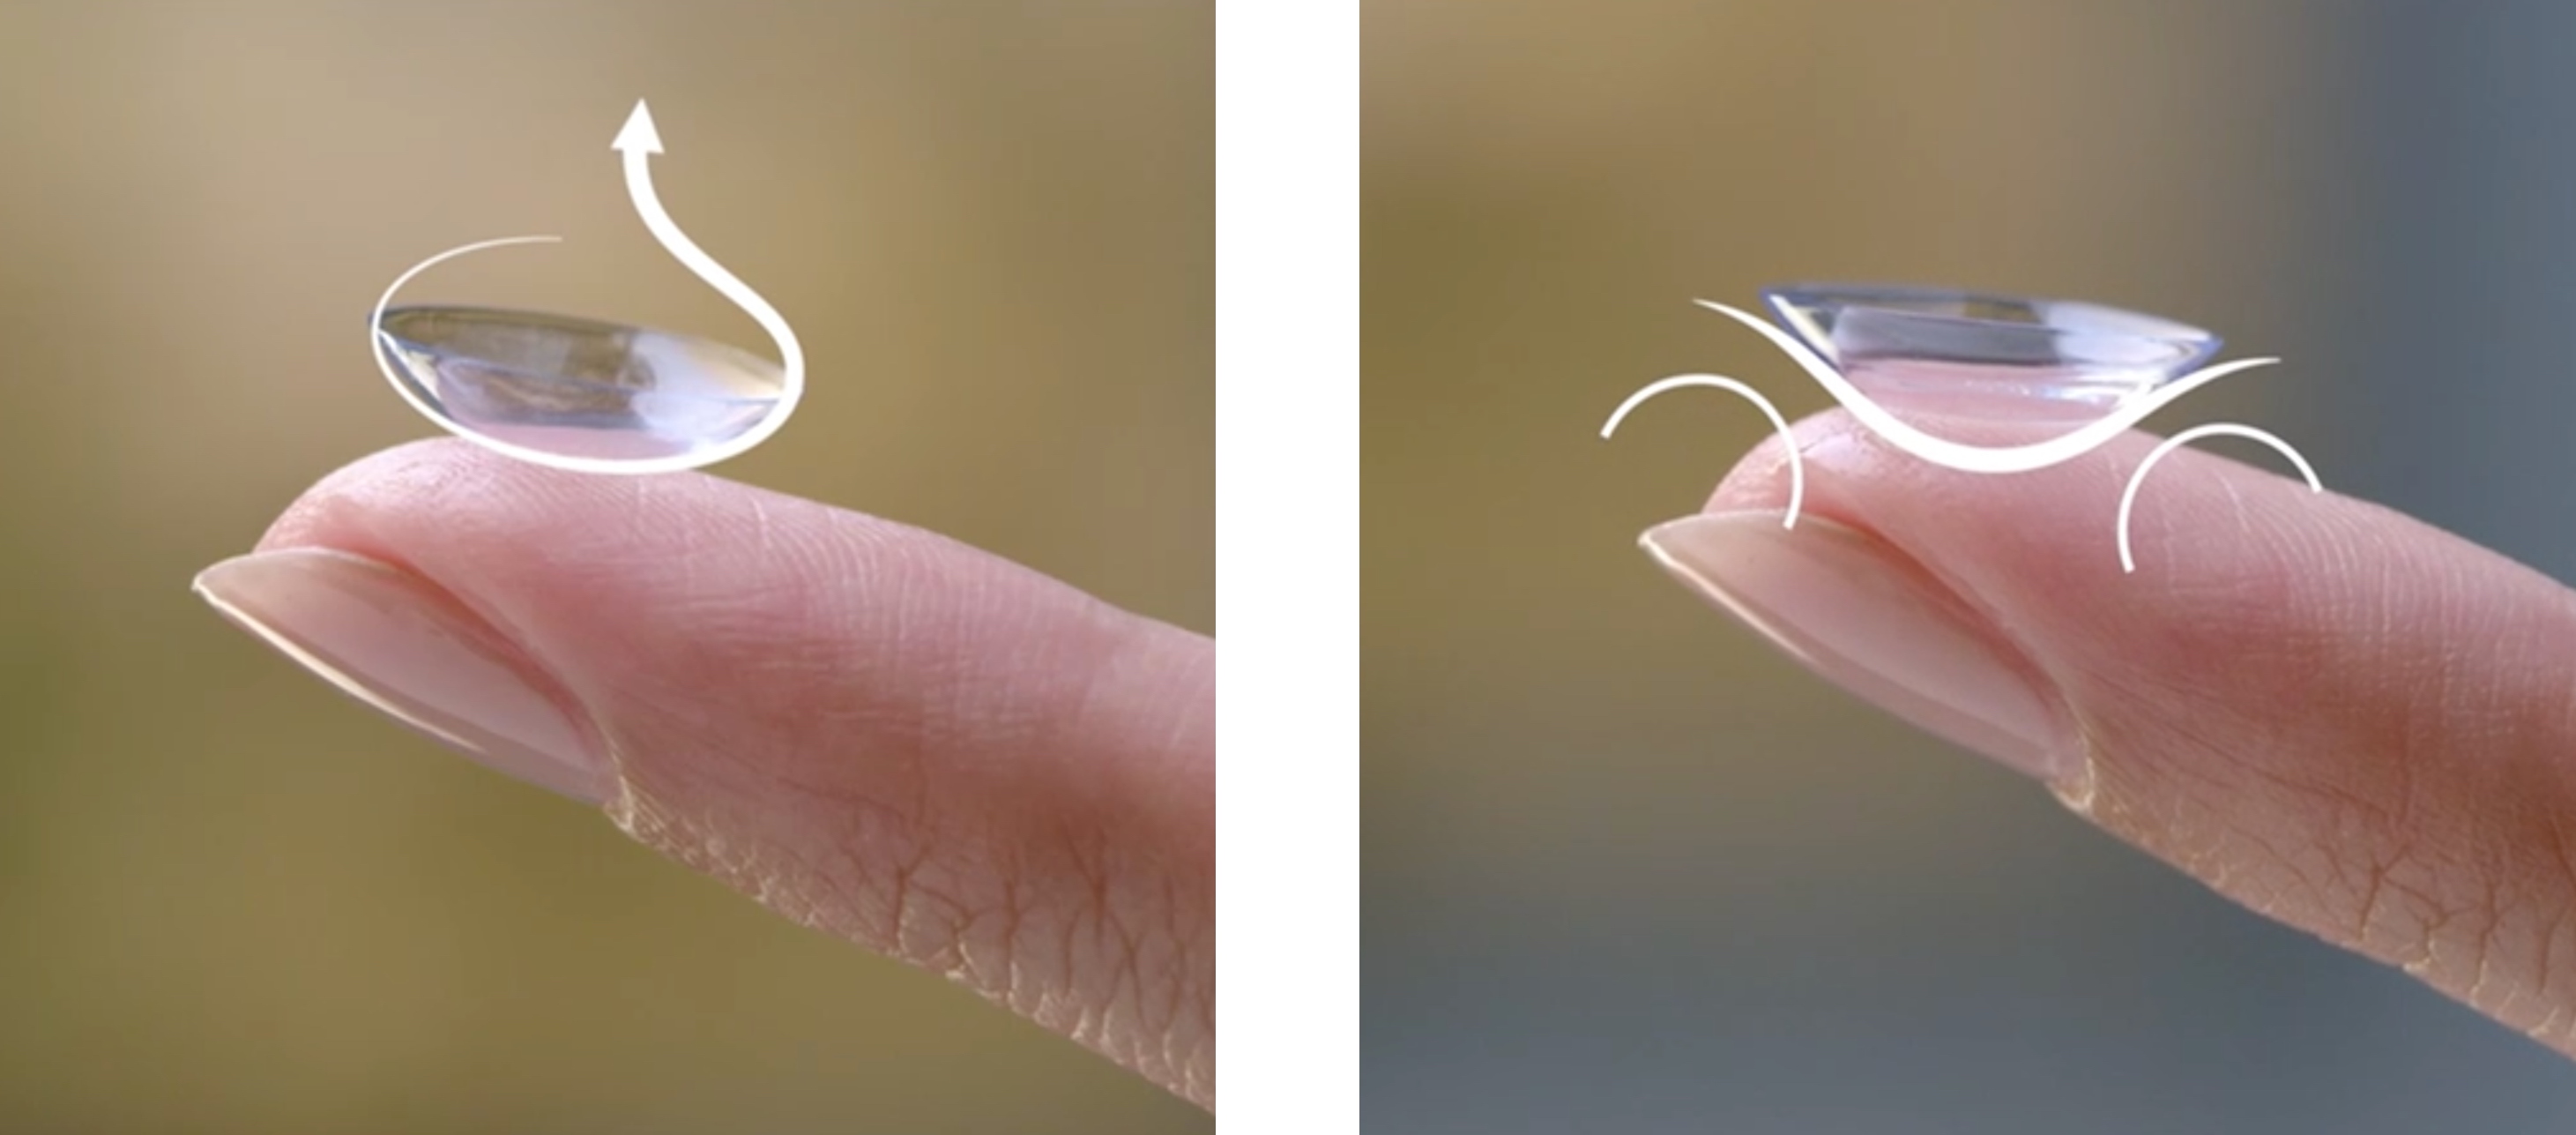 Care of Soft Contact Lenses - Innovative Eye Care